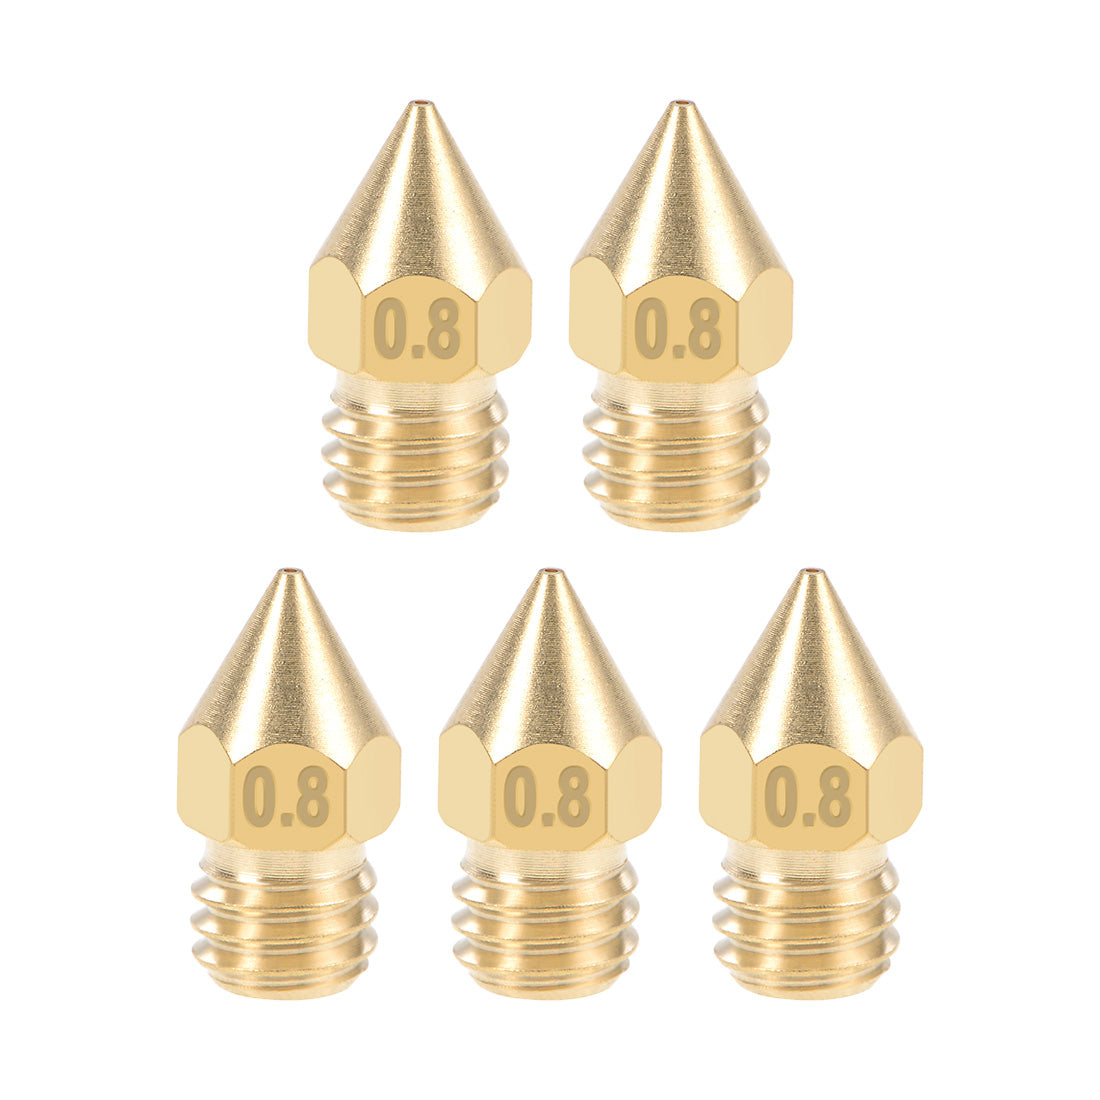 uxcell Uxcell 0.8mm 3D Printer Nozzle Head M6 for MK8 1.75mm Extruder Print, Brass 5pcs